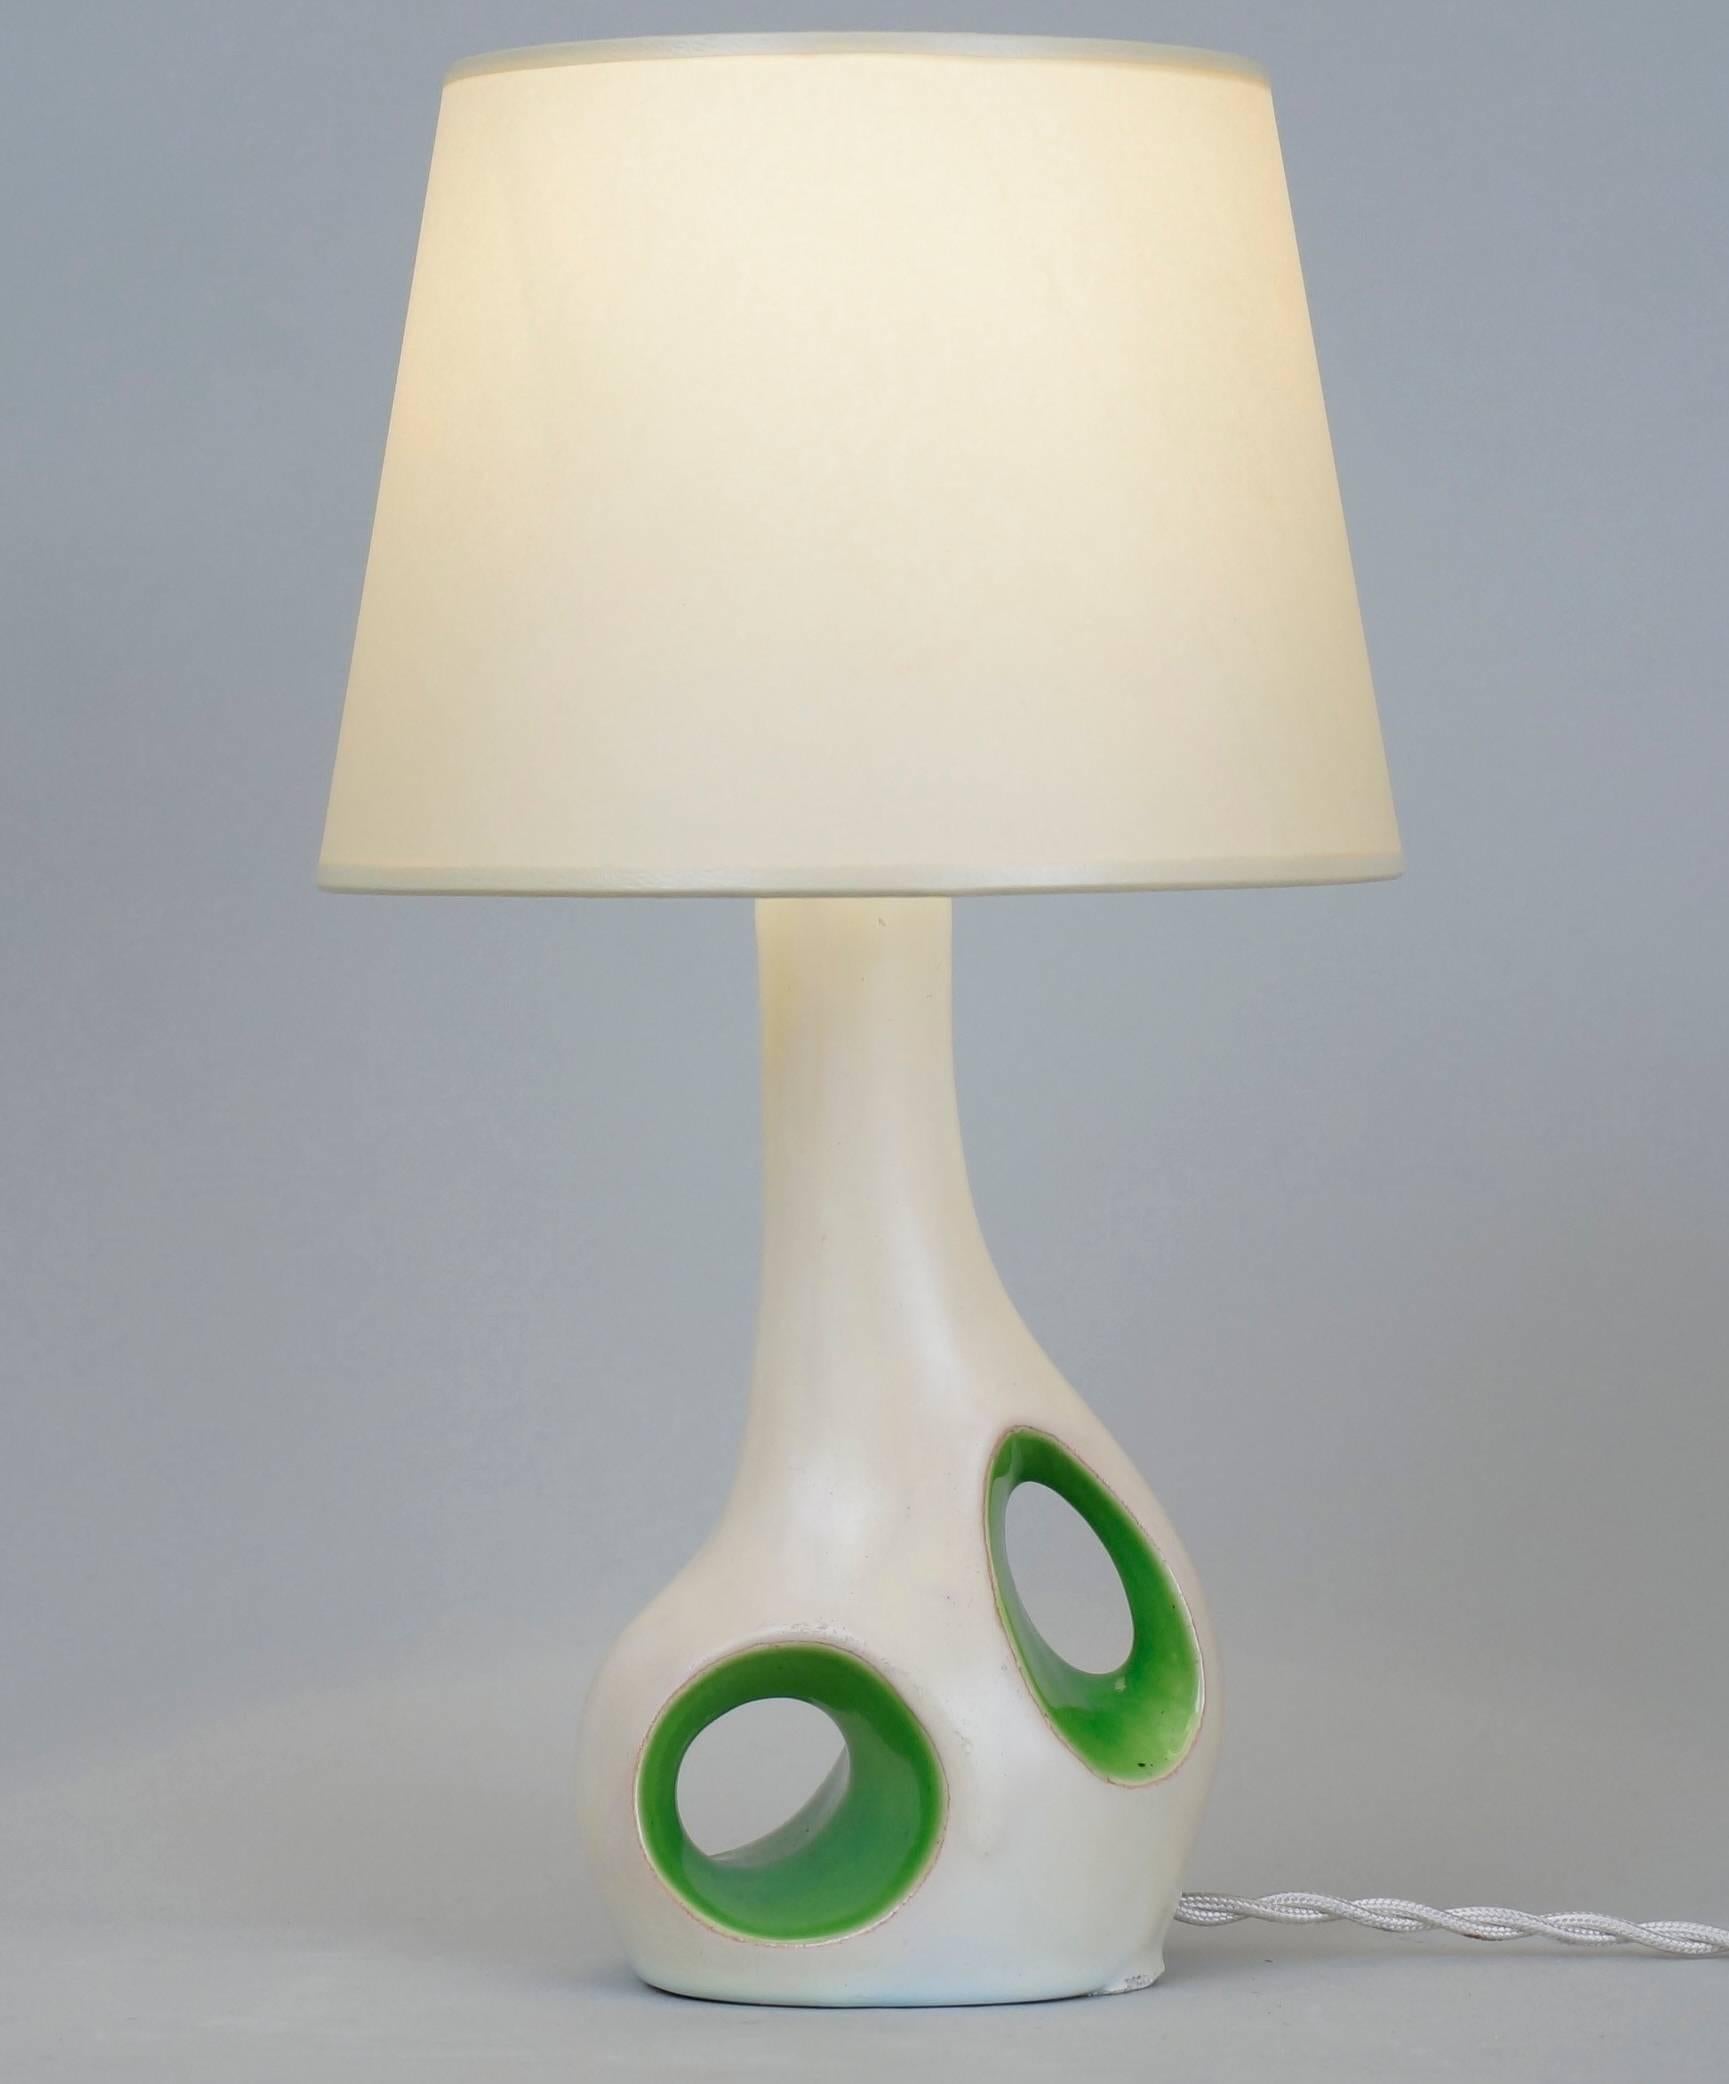 White and green two-toned table lamp.
Custom-made fabric lampshades.
Rewired with twisted silk cord.
US standard plug on request.
Measures: Ceramic height: 17 cm - 6.7 in.
Height with lampshade: 29 cm - 11.4 in.